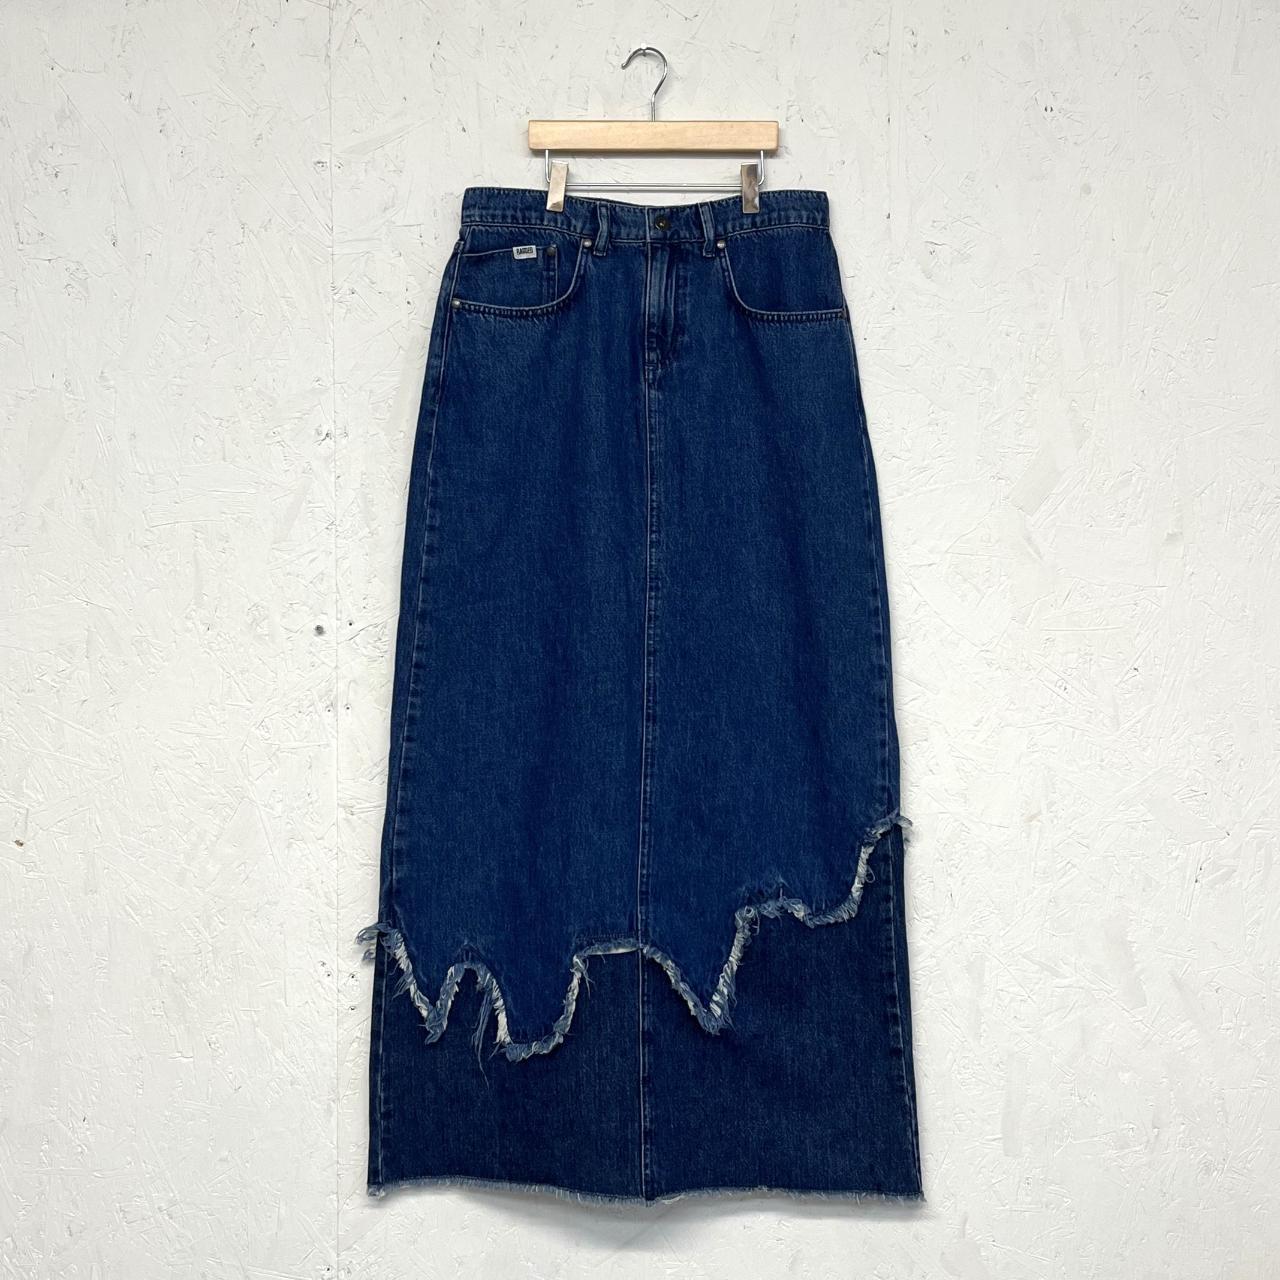 The Ragged Priest Women's Navy and Blue Skirt | Depop